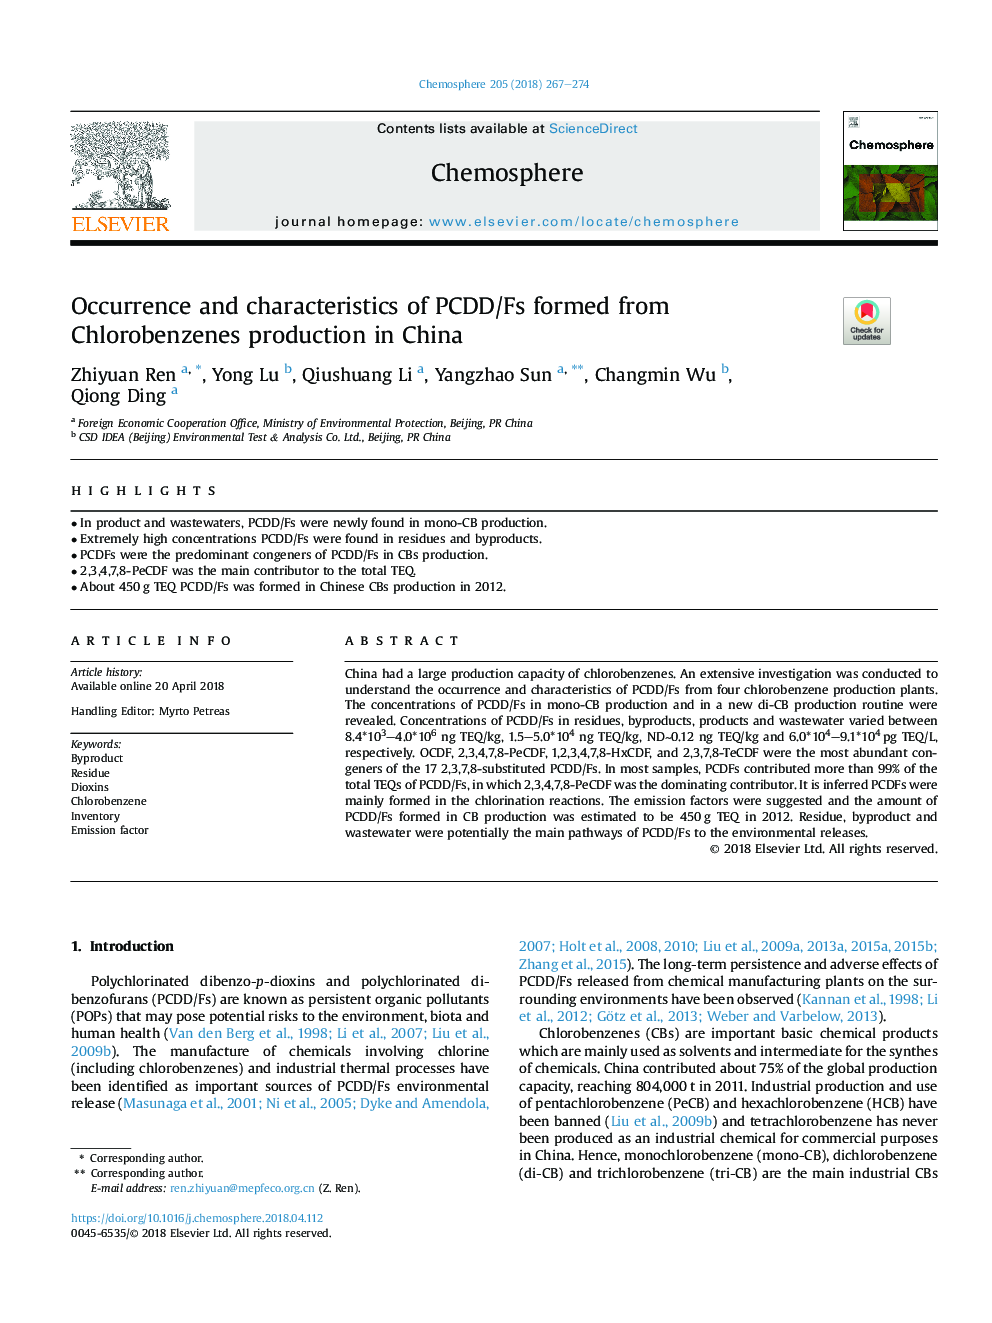 Occurrence and characteristics of PCDD/Fs formed from Chlorobenzenes production in China